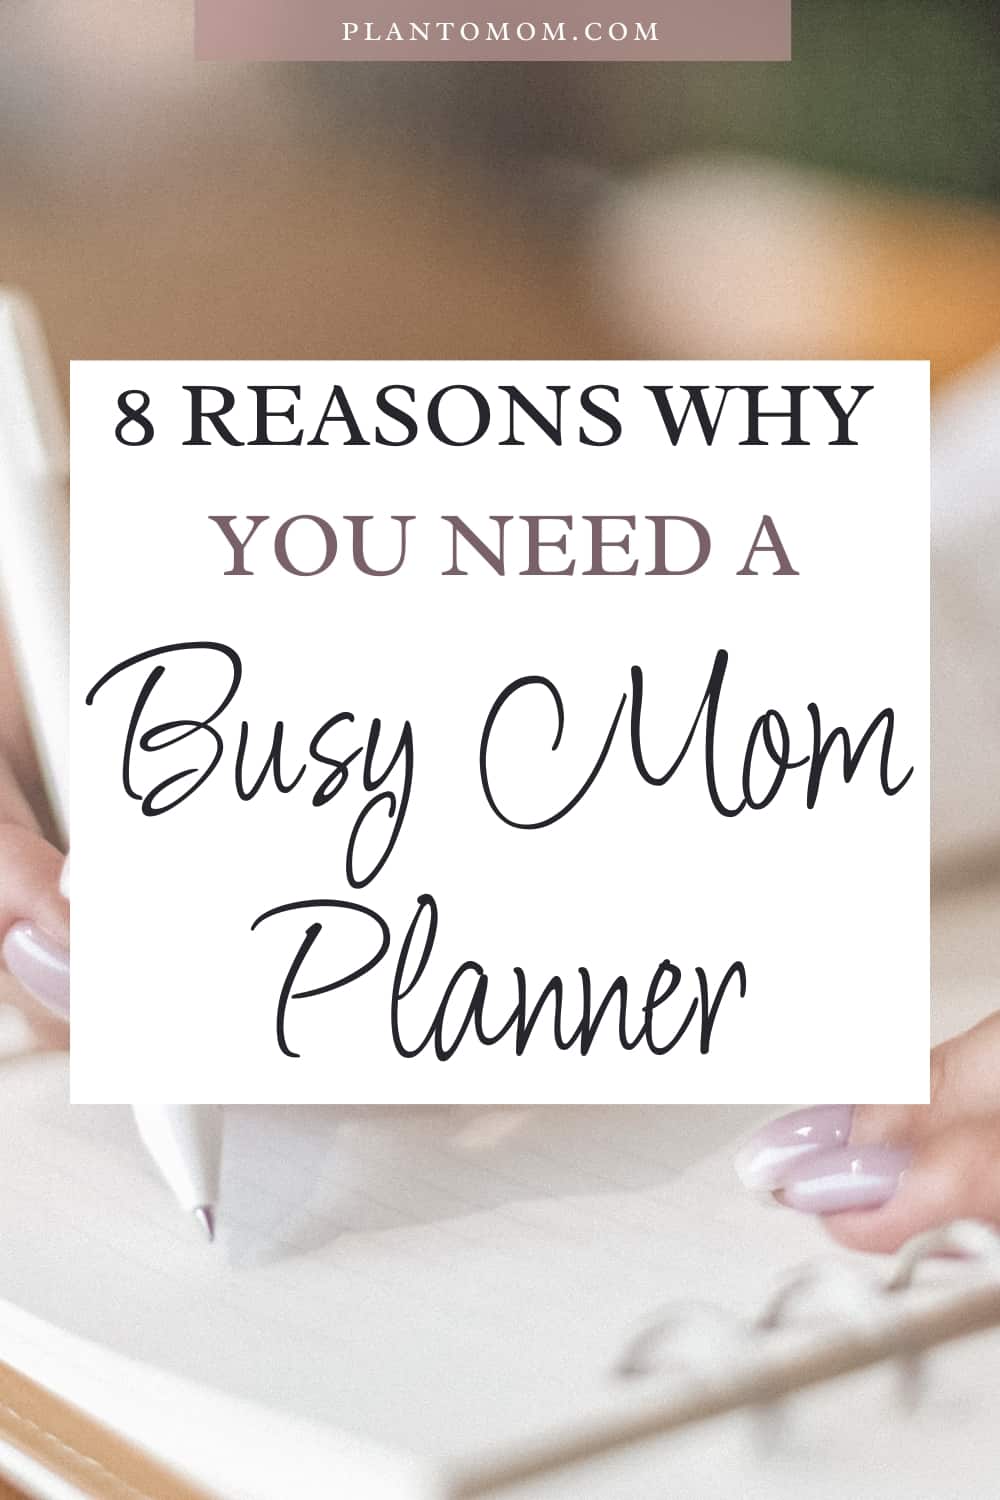 8-reasons-why-you-need-a-busy-mom-planner